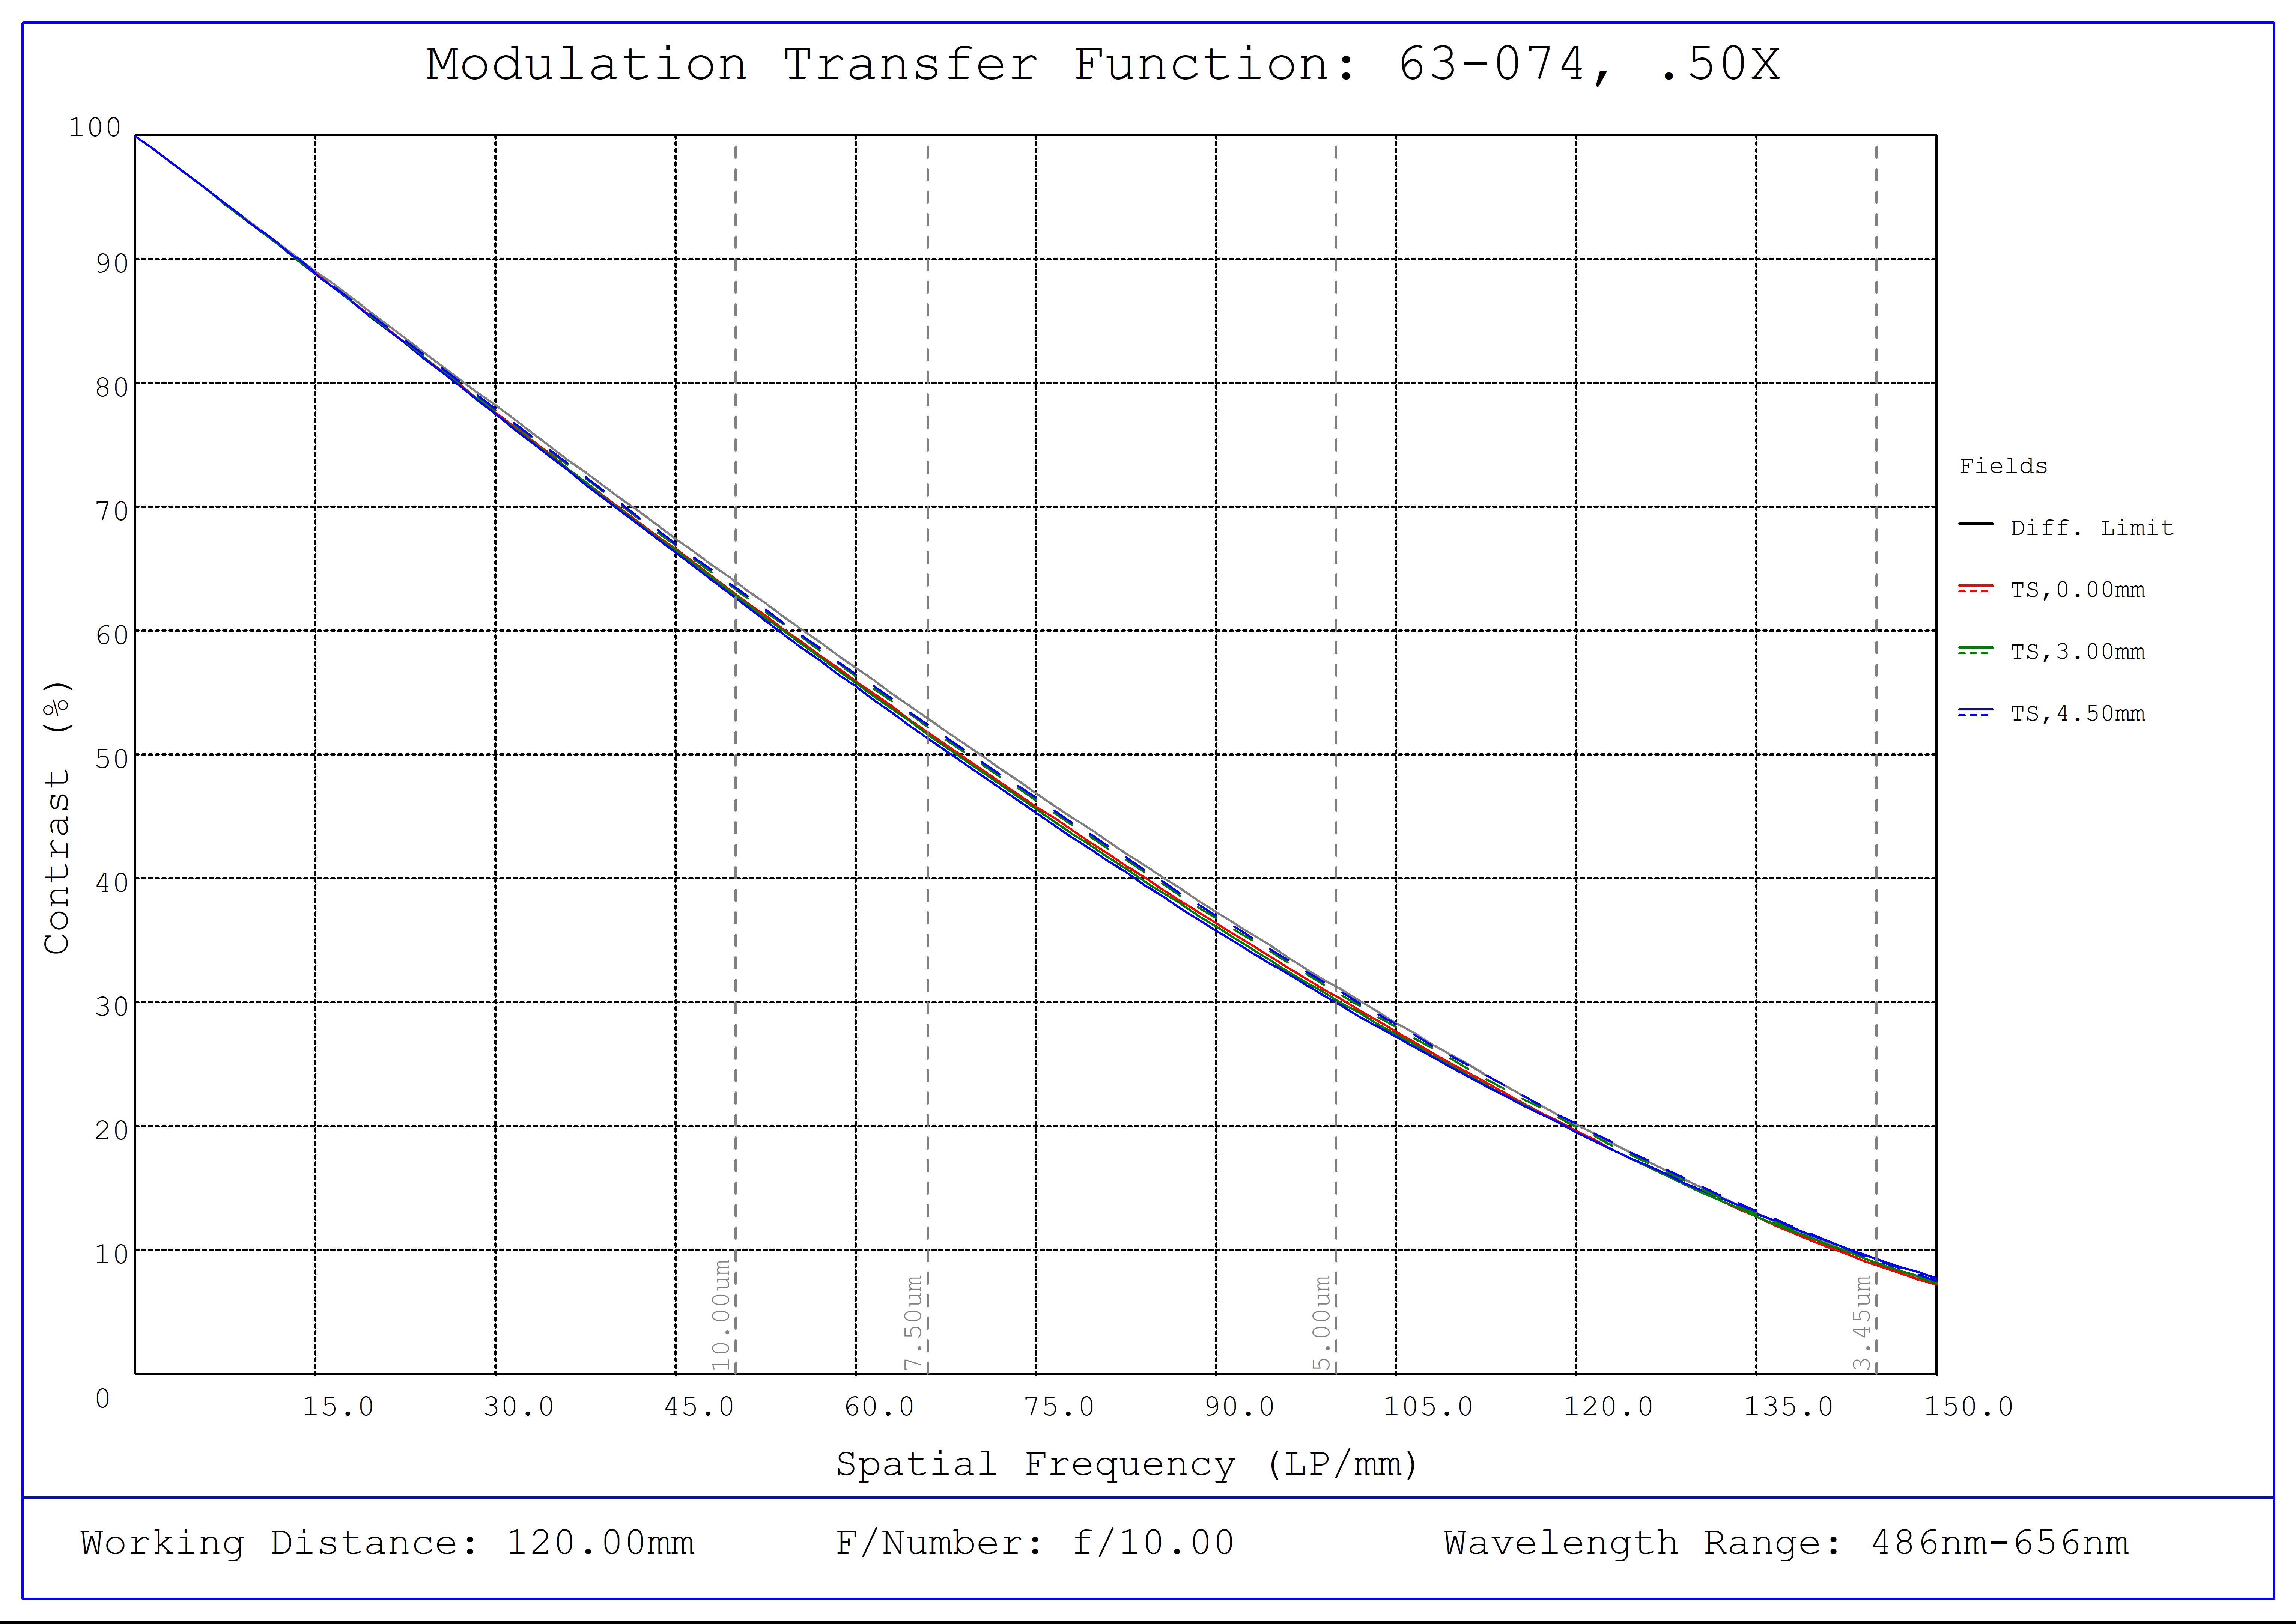 #63-074, 0.50X SilverTL™ Telecentric Lens, Modulated Transfer Function (MTF) Plot, 120mm Working Distance, f10